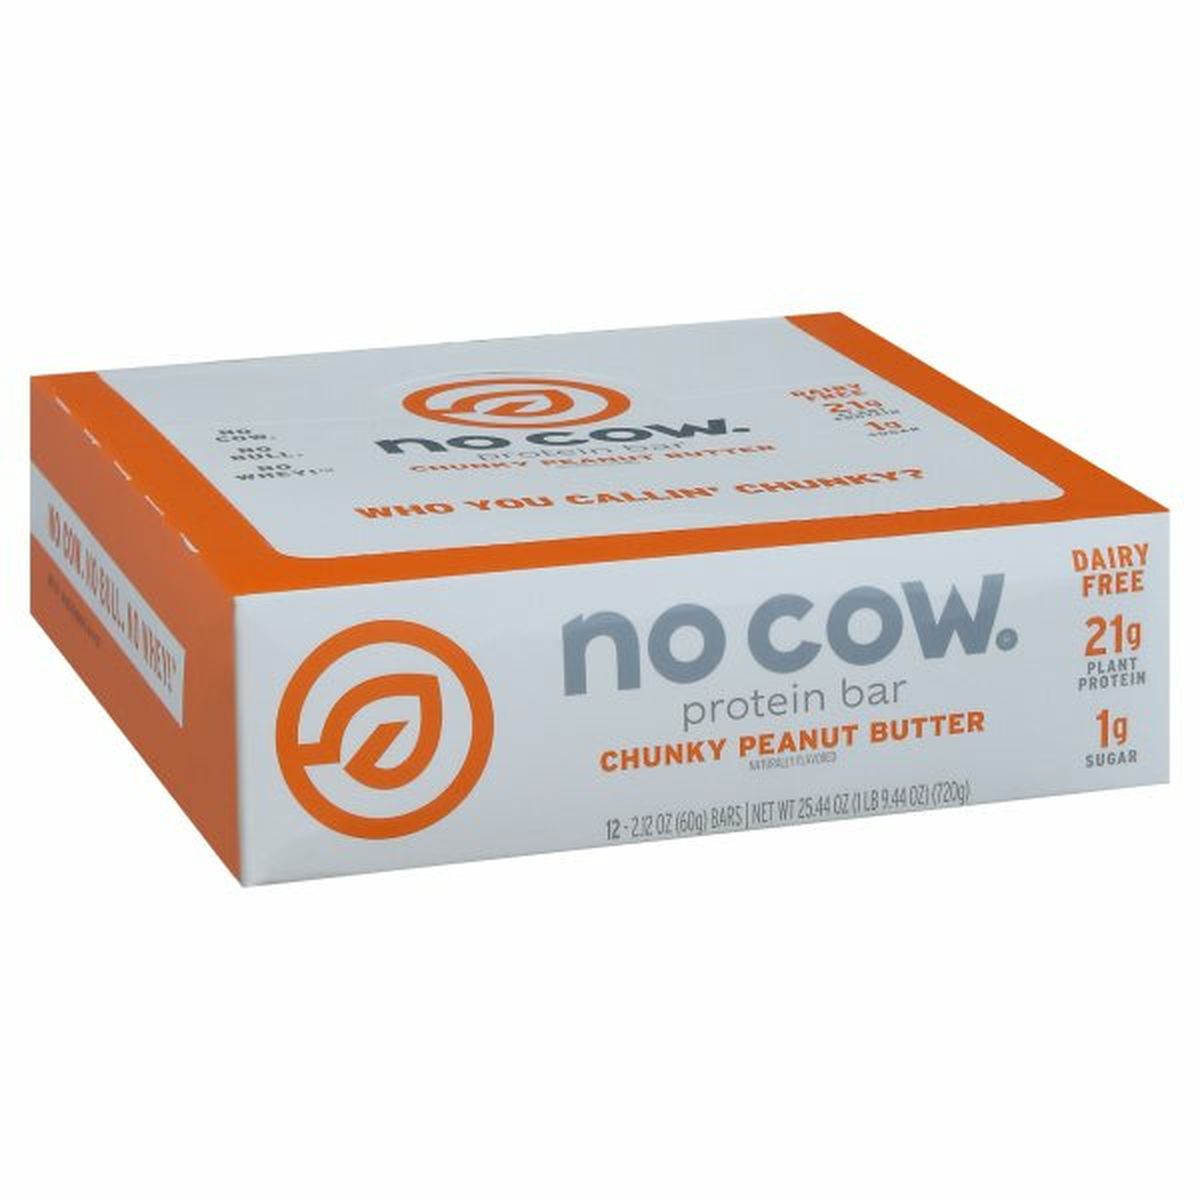 Calories in No Cow Protein Bar, Chunky Peanut Butter